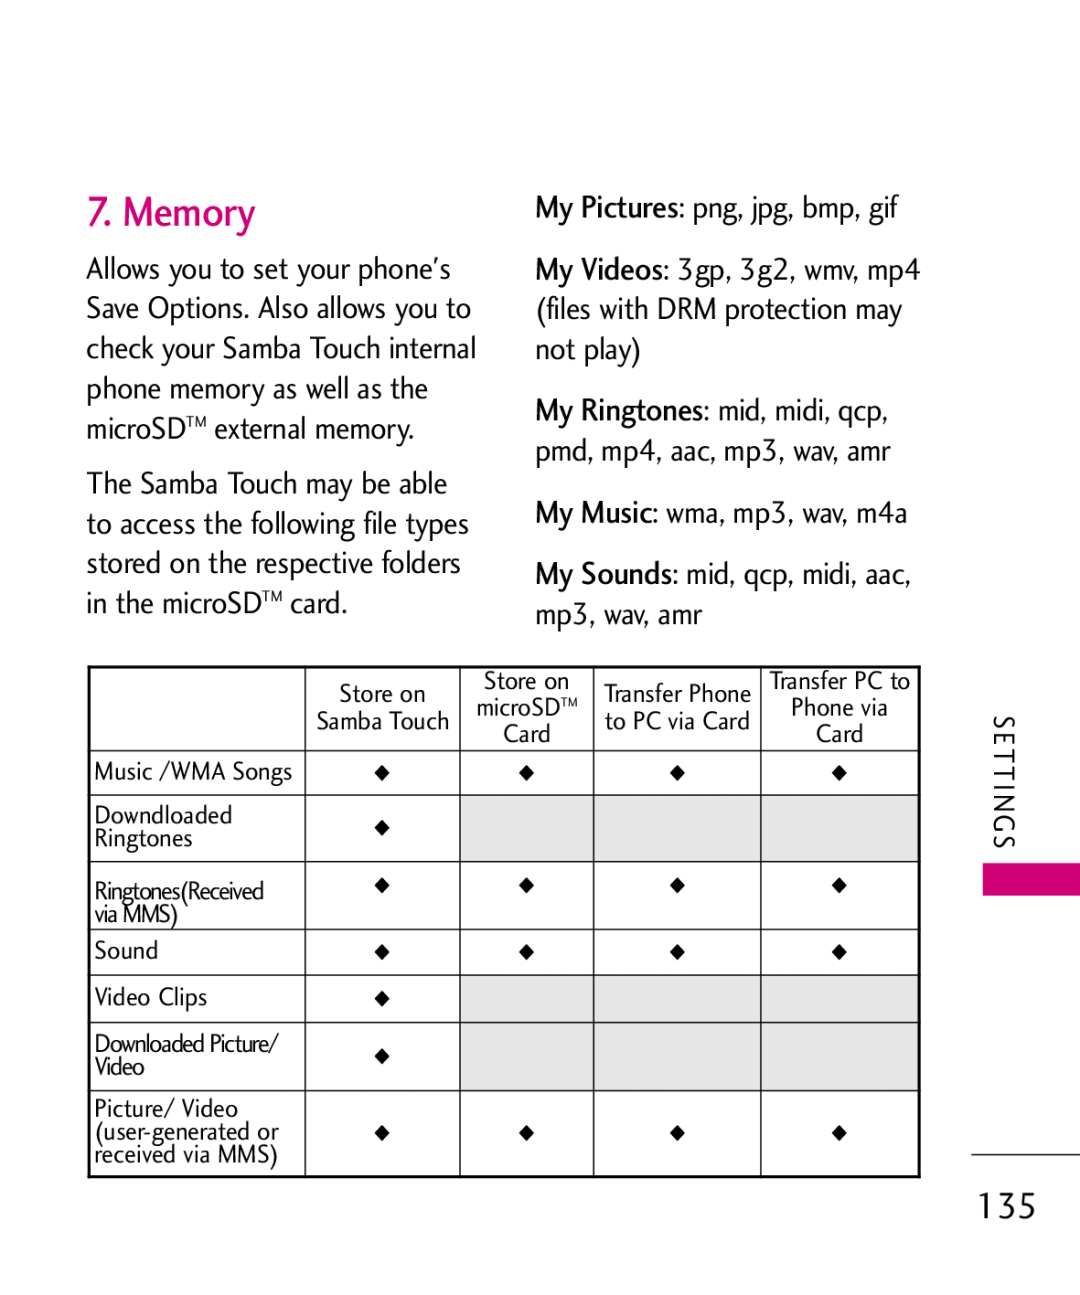 LG Electronics MMBB0379501 manual Memory, My Pictures png, jpg, bmp, gif, My Music wma, mp3, wav, m4a 